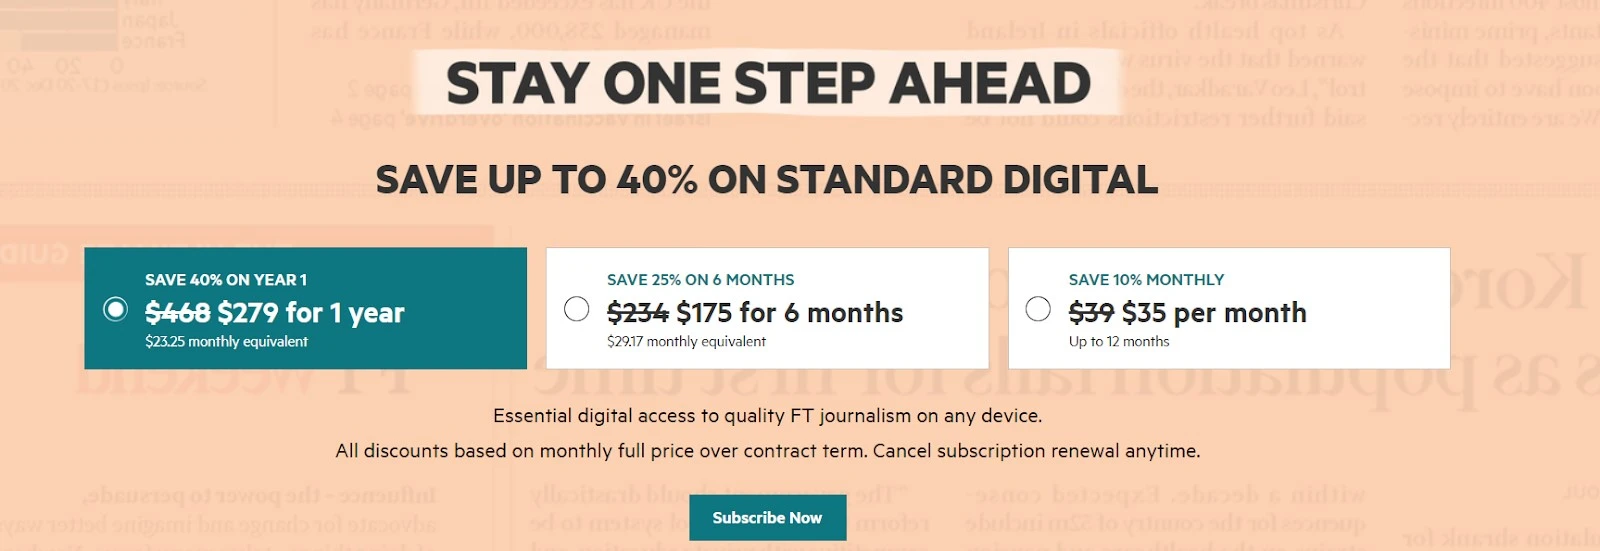 save up to 40% on standard digital